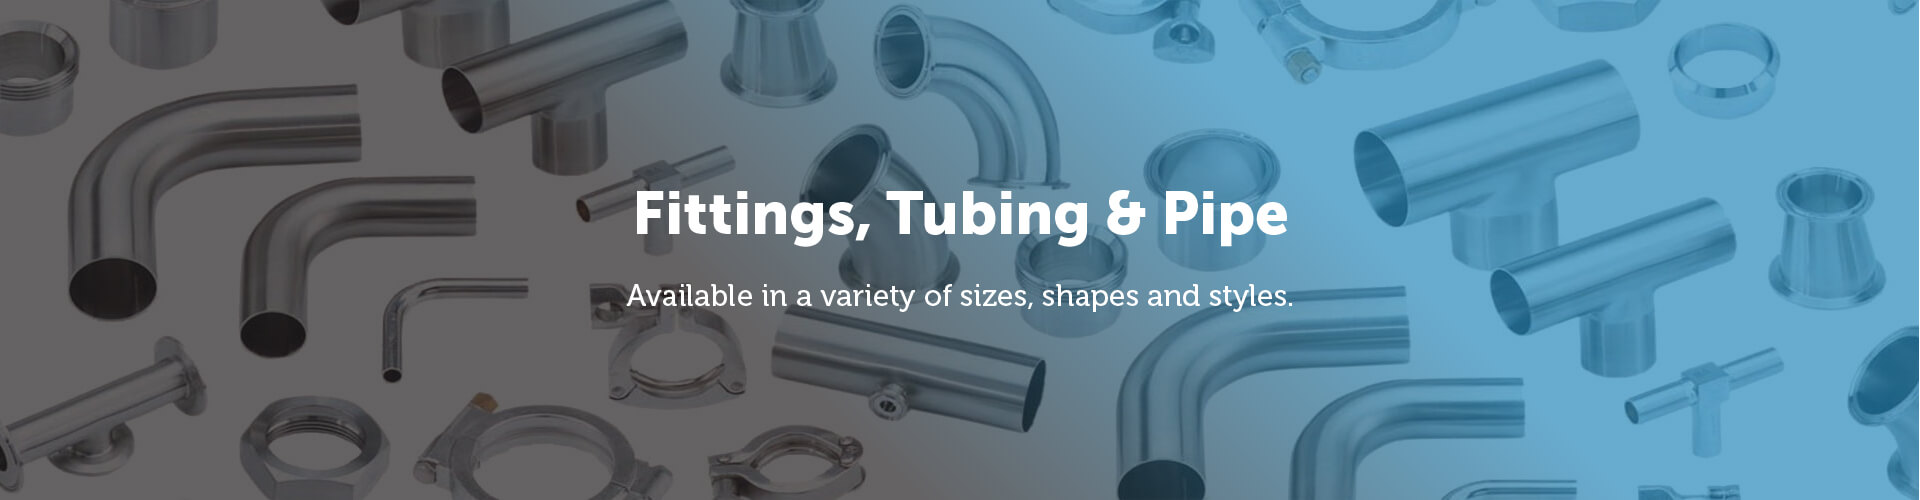 Koss Fittings tube and Pipe